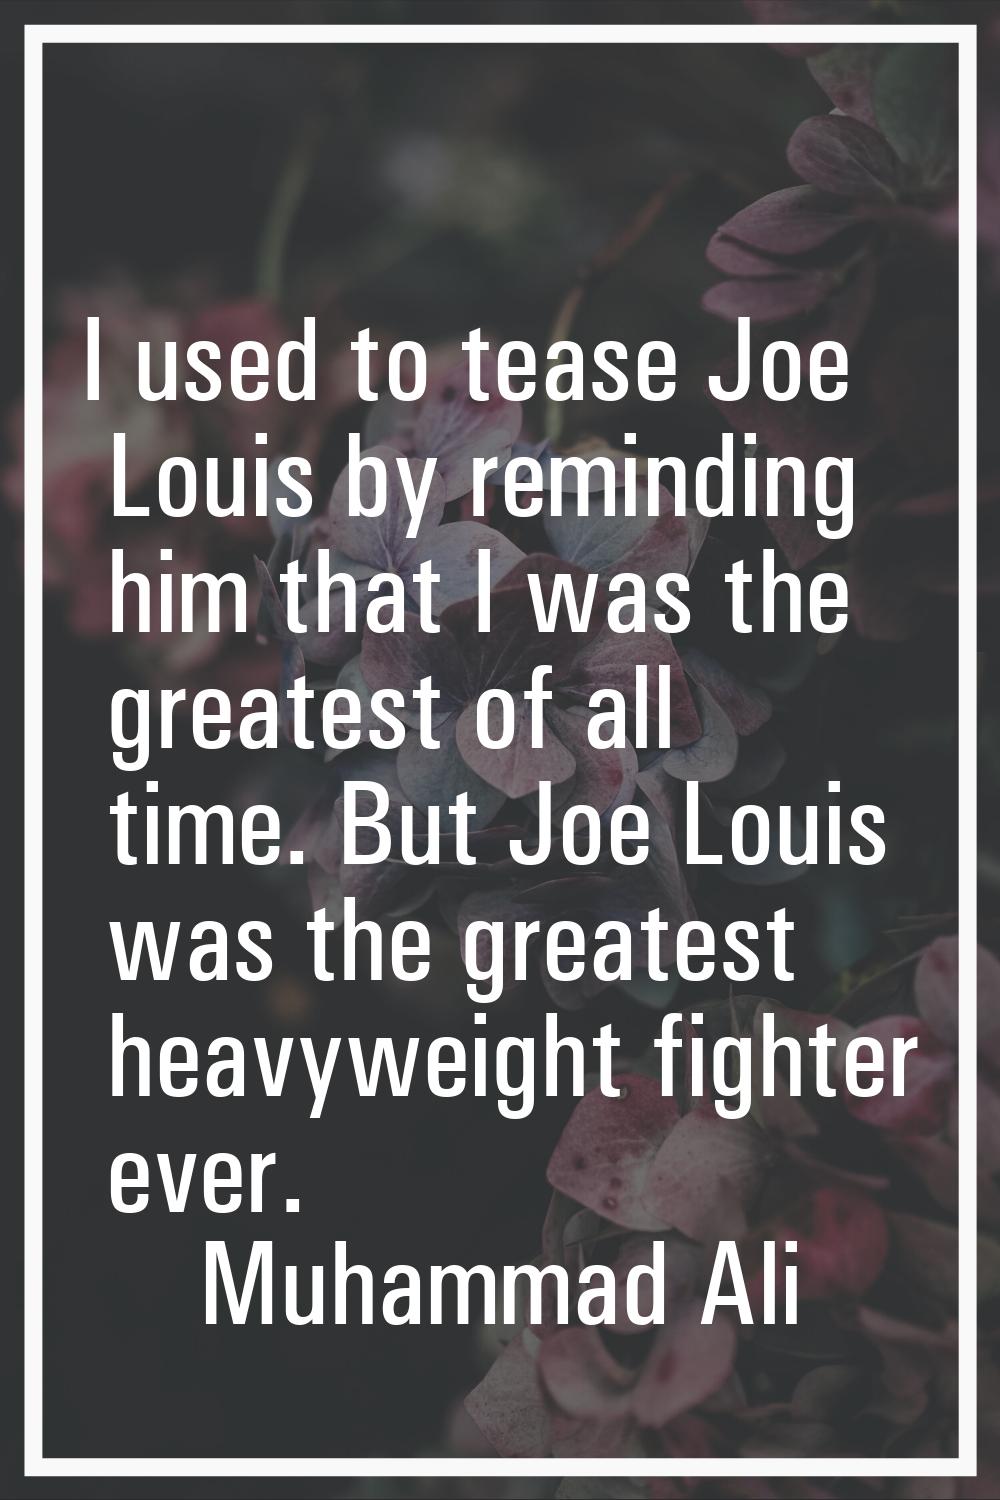 I used to tease Joe Louis by reminding him that I was the greatest of all time. But Joe Louis was t